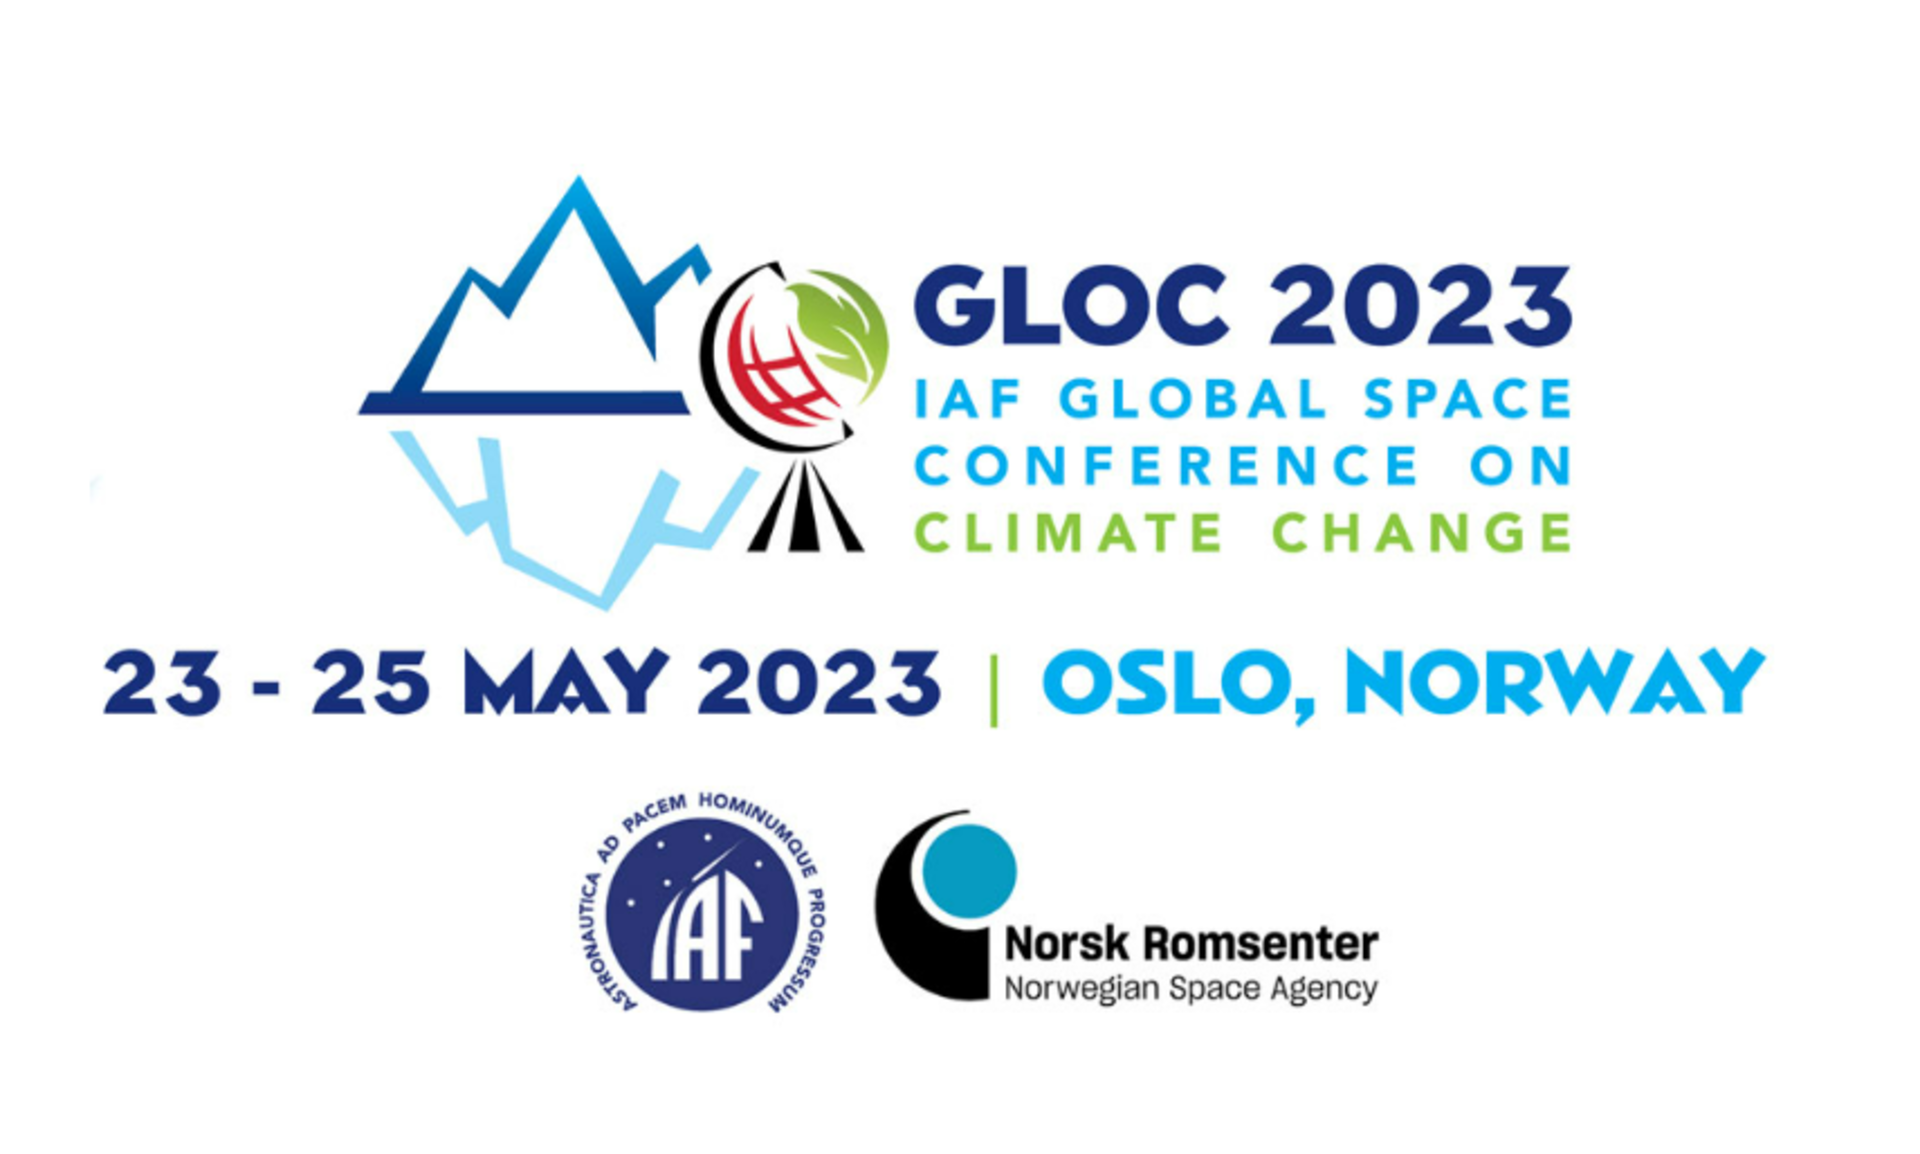 ESA Global Space Conference on Climate Change